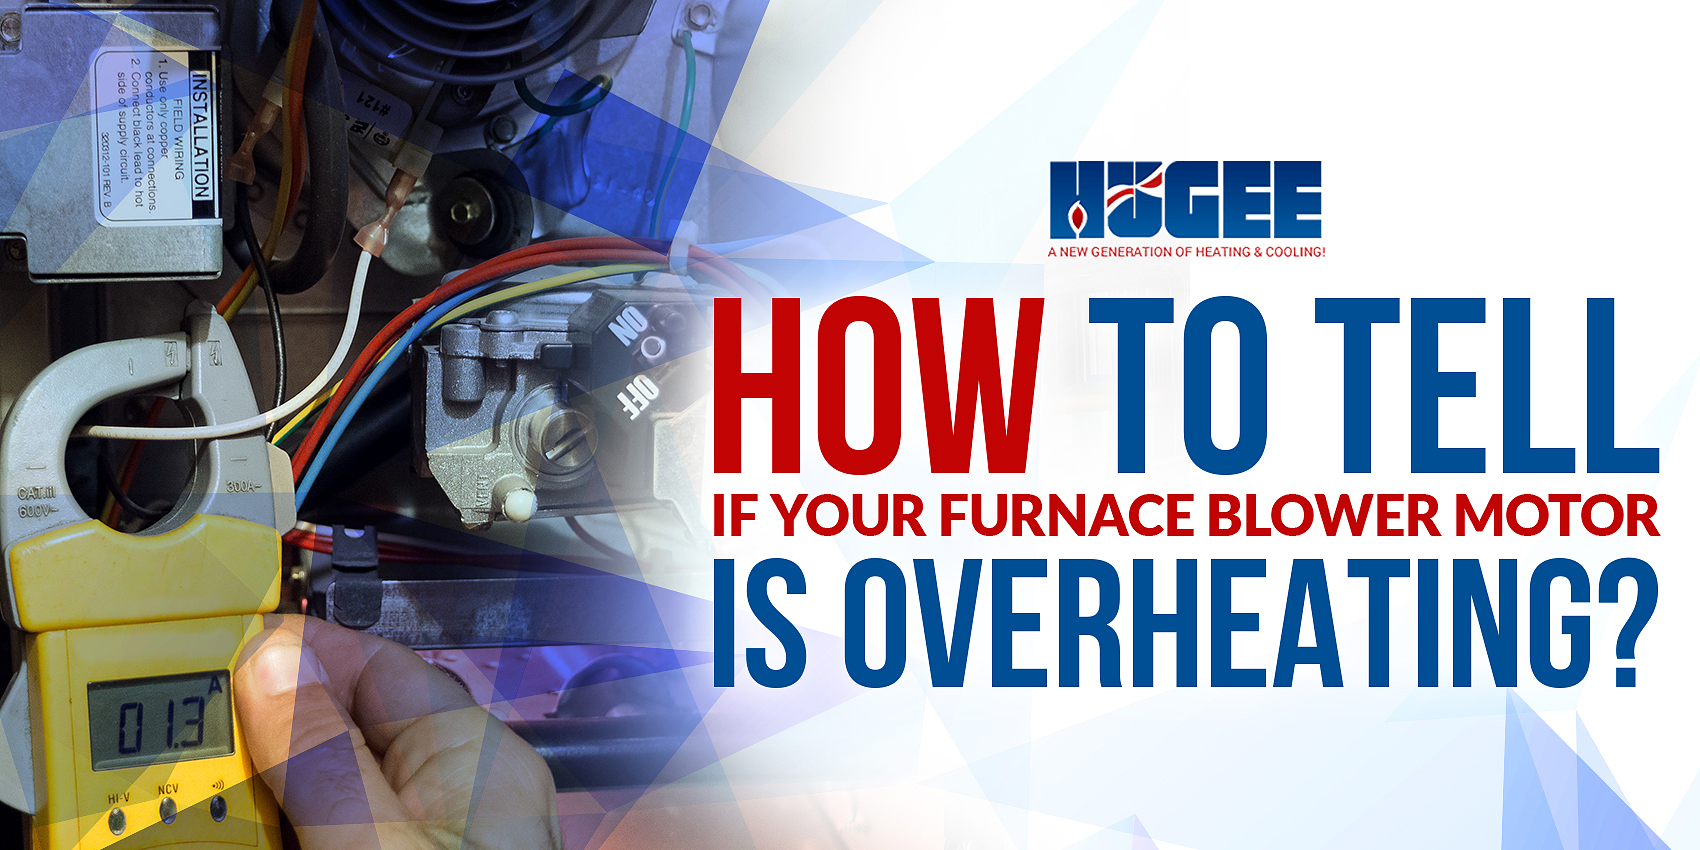 How To Tell If Your Furnace Blower Motor Is Overheating?